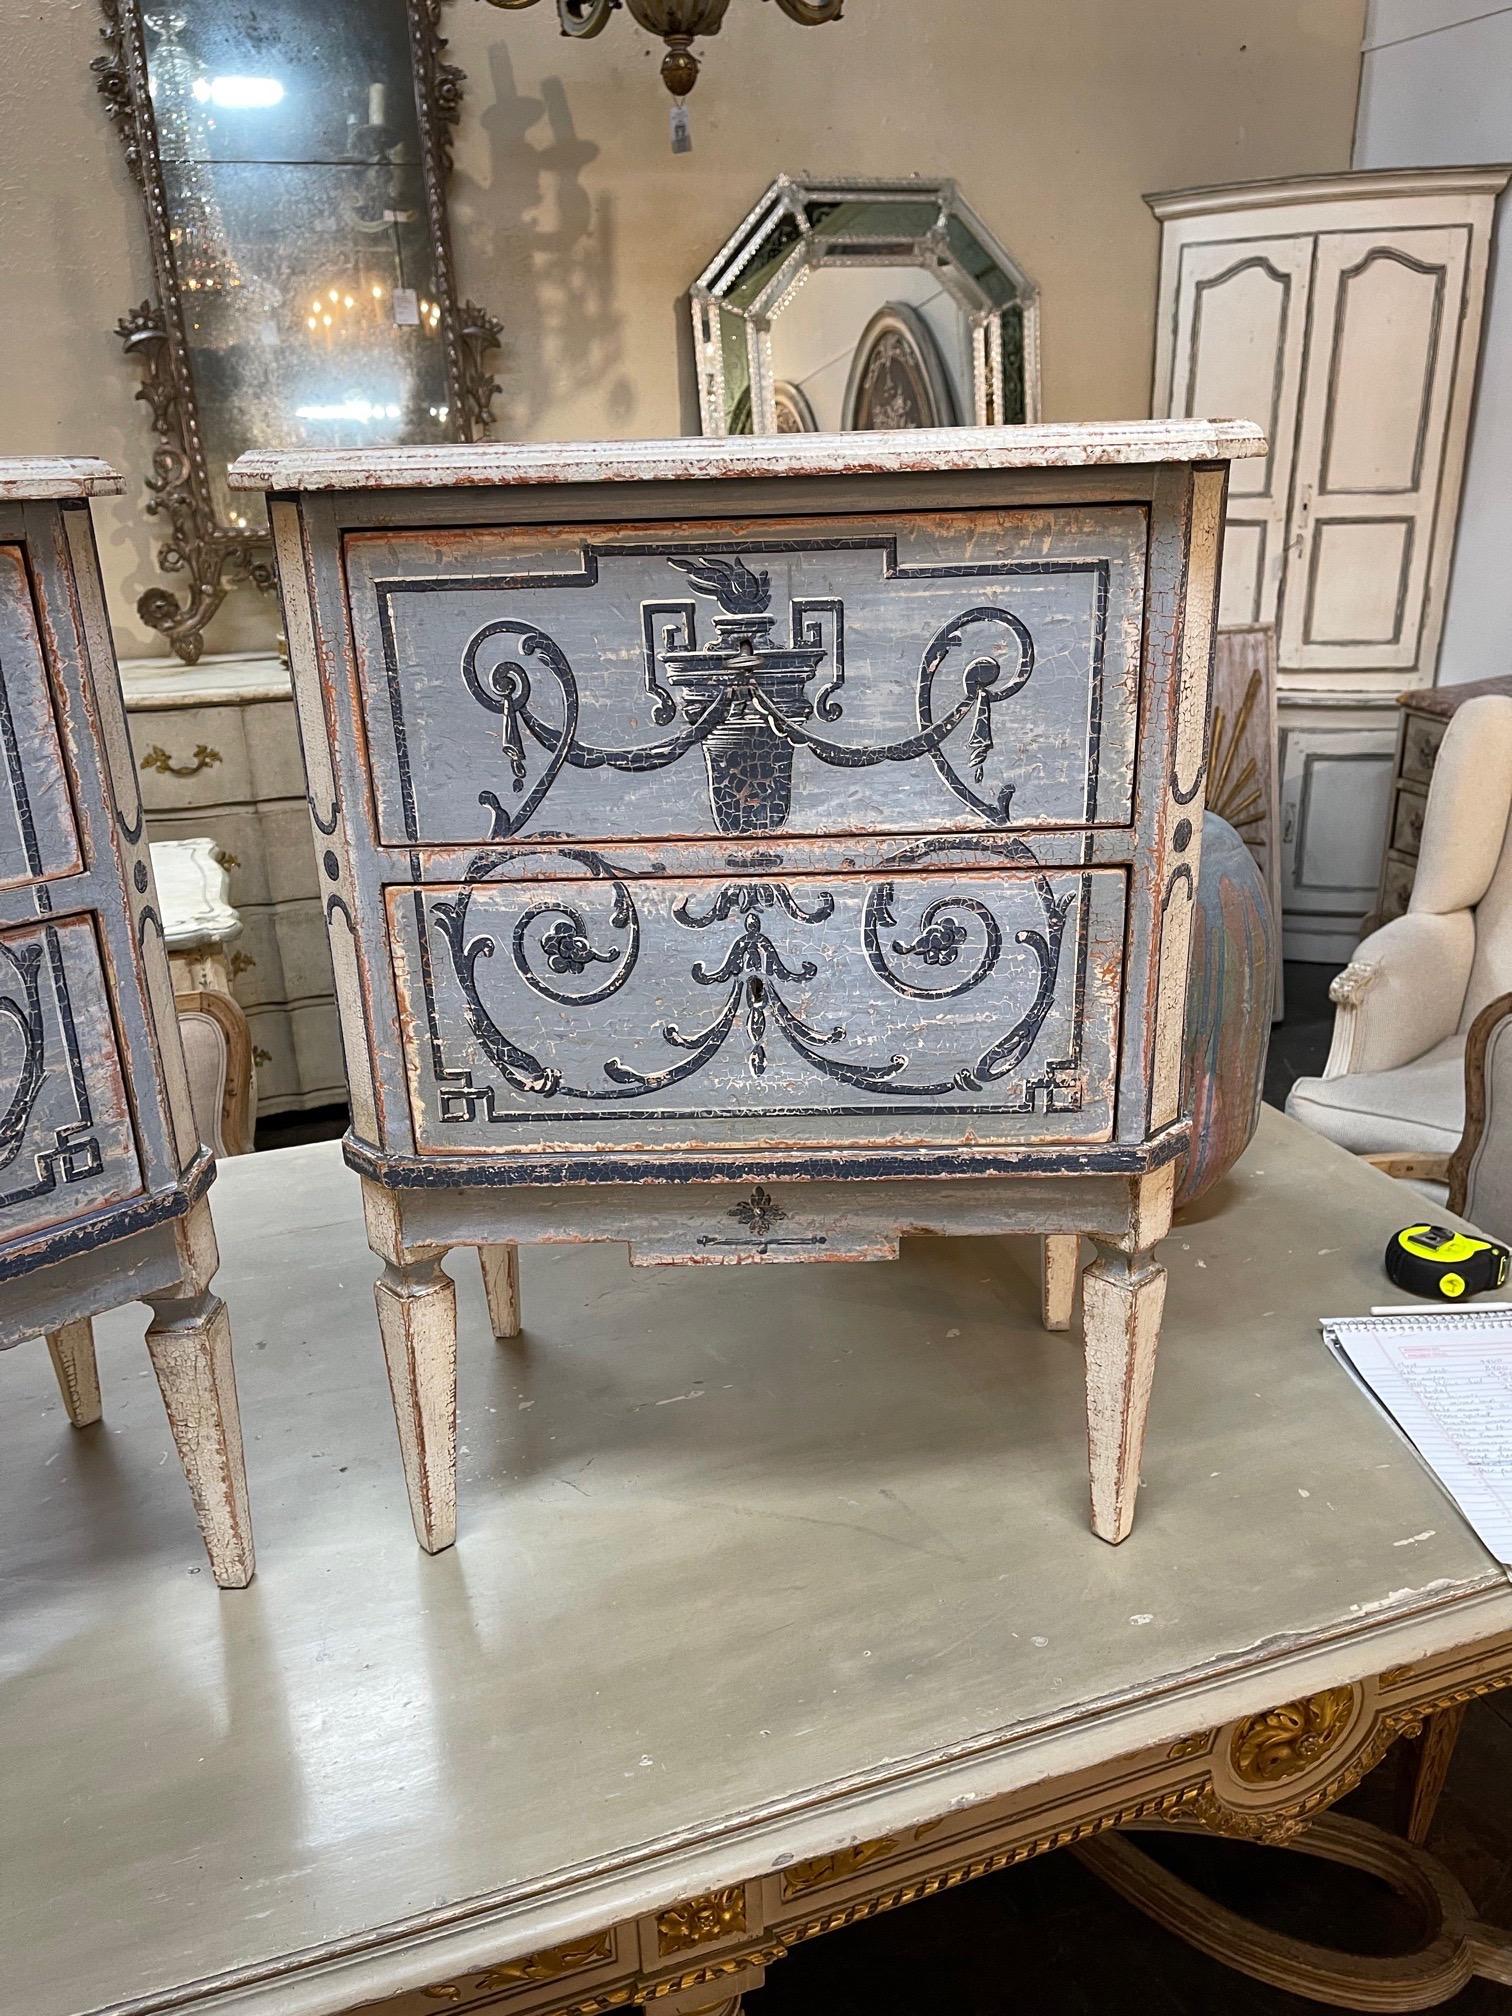 Decorative pair of hand painted Italian Neo-Classical style 2 drawer bed side tables. Nice design featuring an urn and floral images. The piece has lovely colors of blue and white as well. So pretty!!